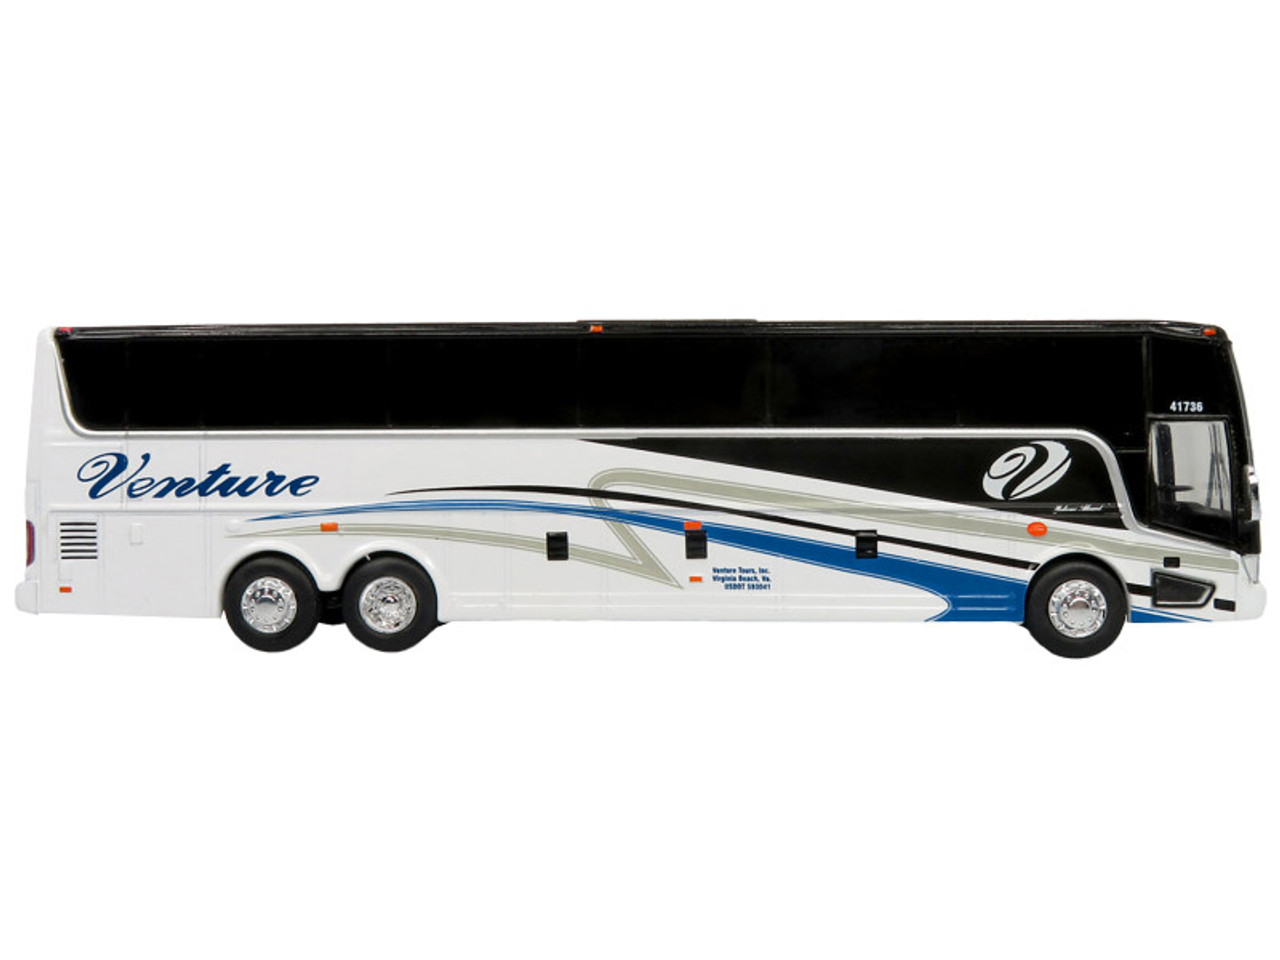 Van Hool TX45 Coach Bus "Venture Tours" White "The Bus & Motorcoach Collection" Limited Edition to 504 pieces Worldwide 1/87 (HO) Diecast Model by Iconic Replicas